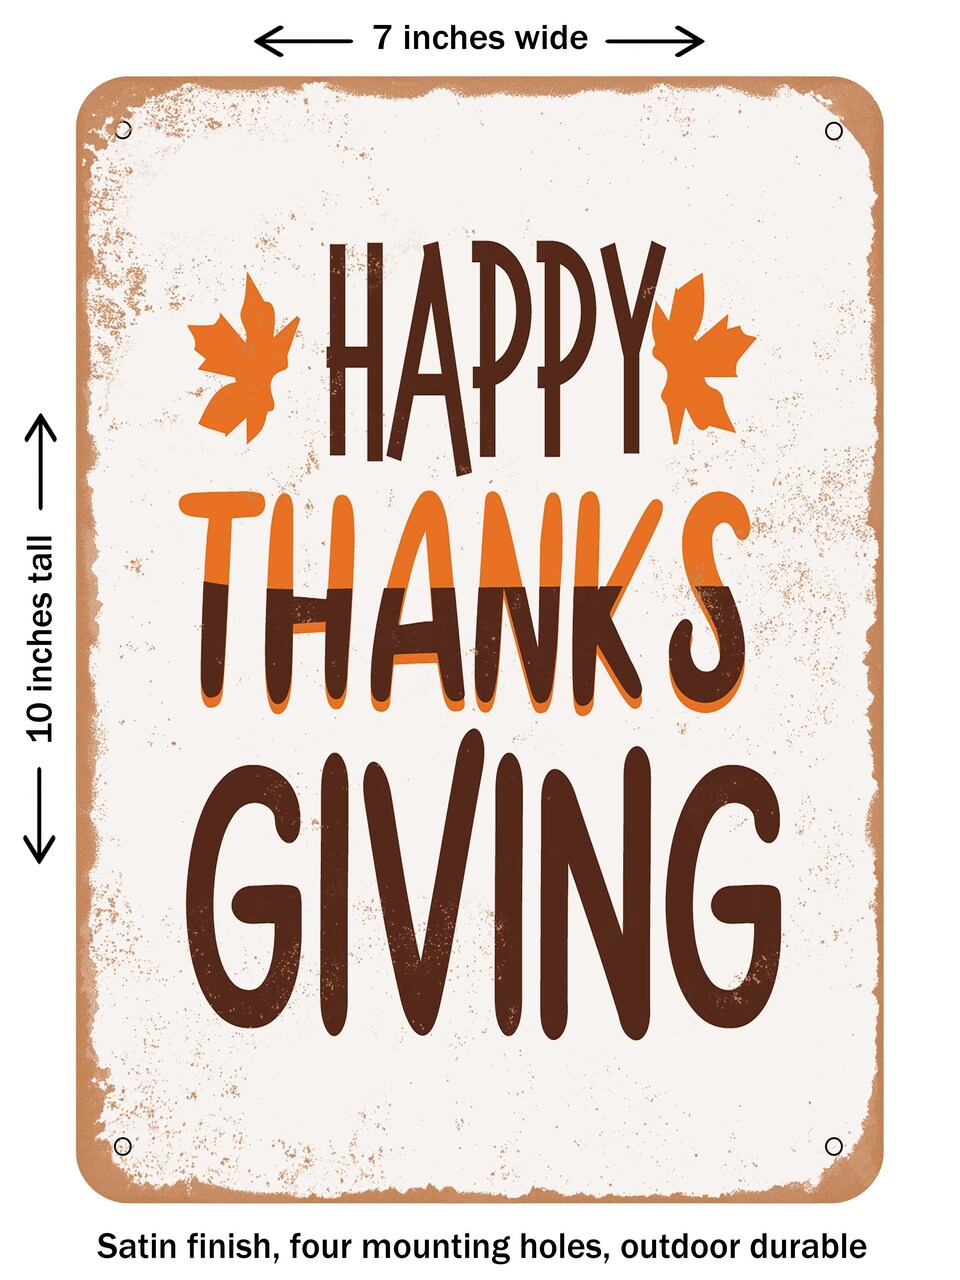 DECORATIVE METAL SIGN - Happy Thanks Giving - 3  - Vintage Rusty Look